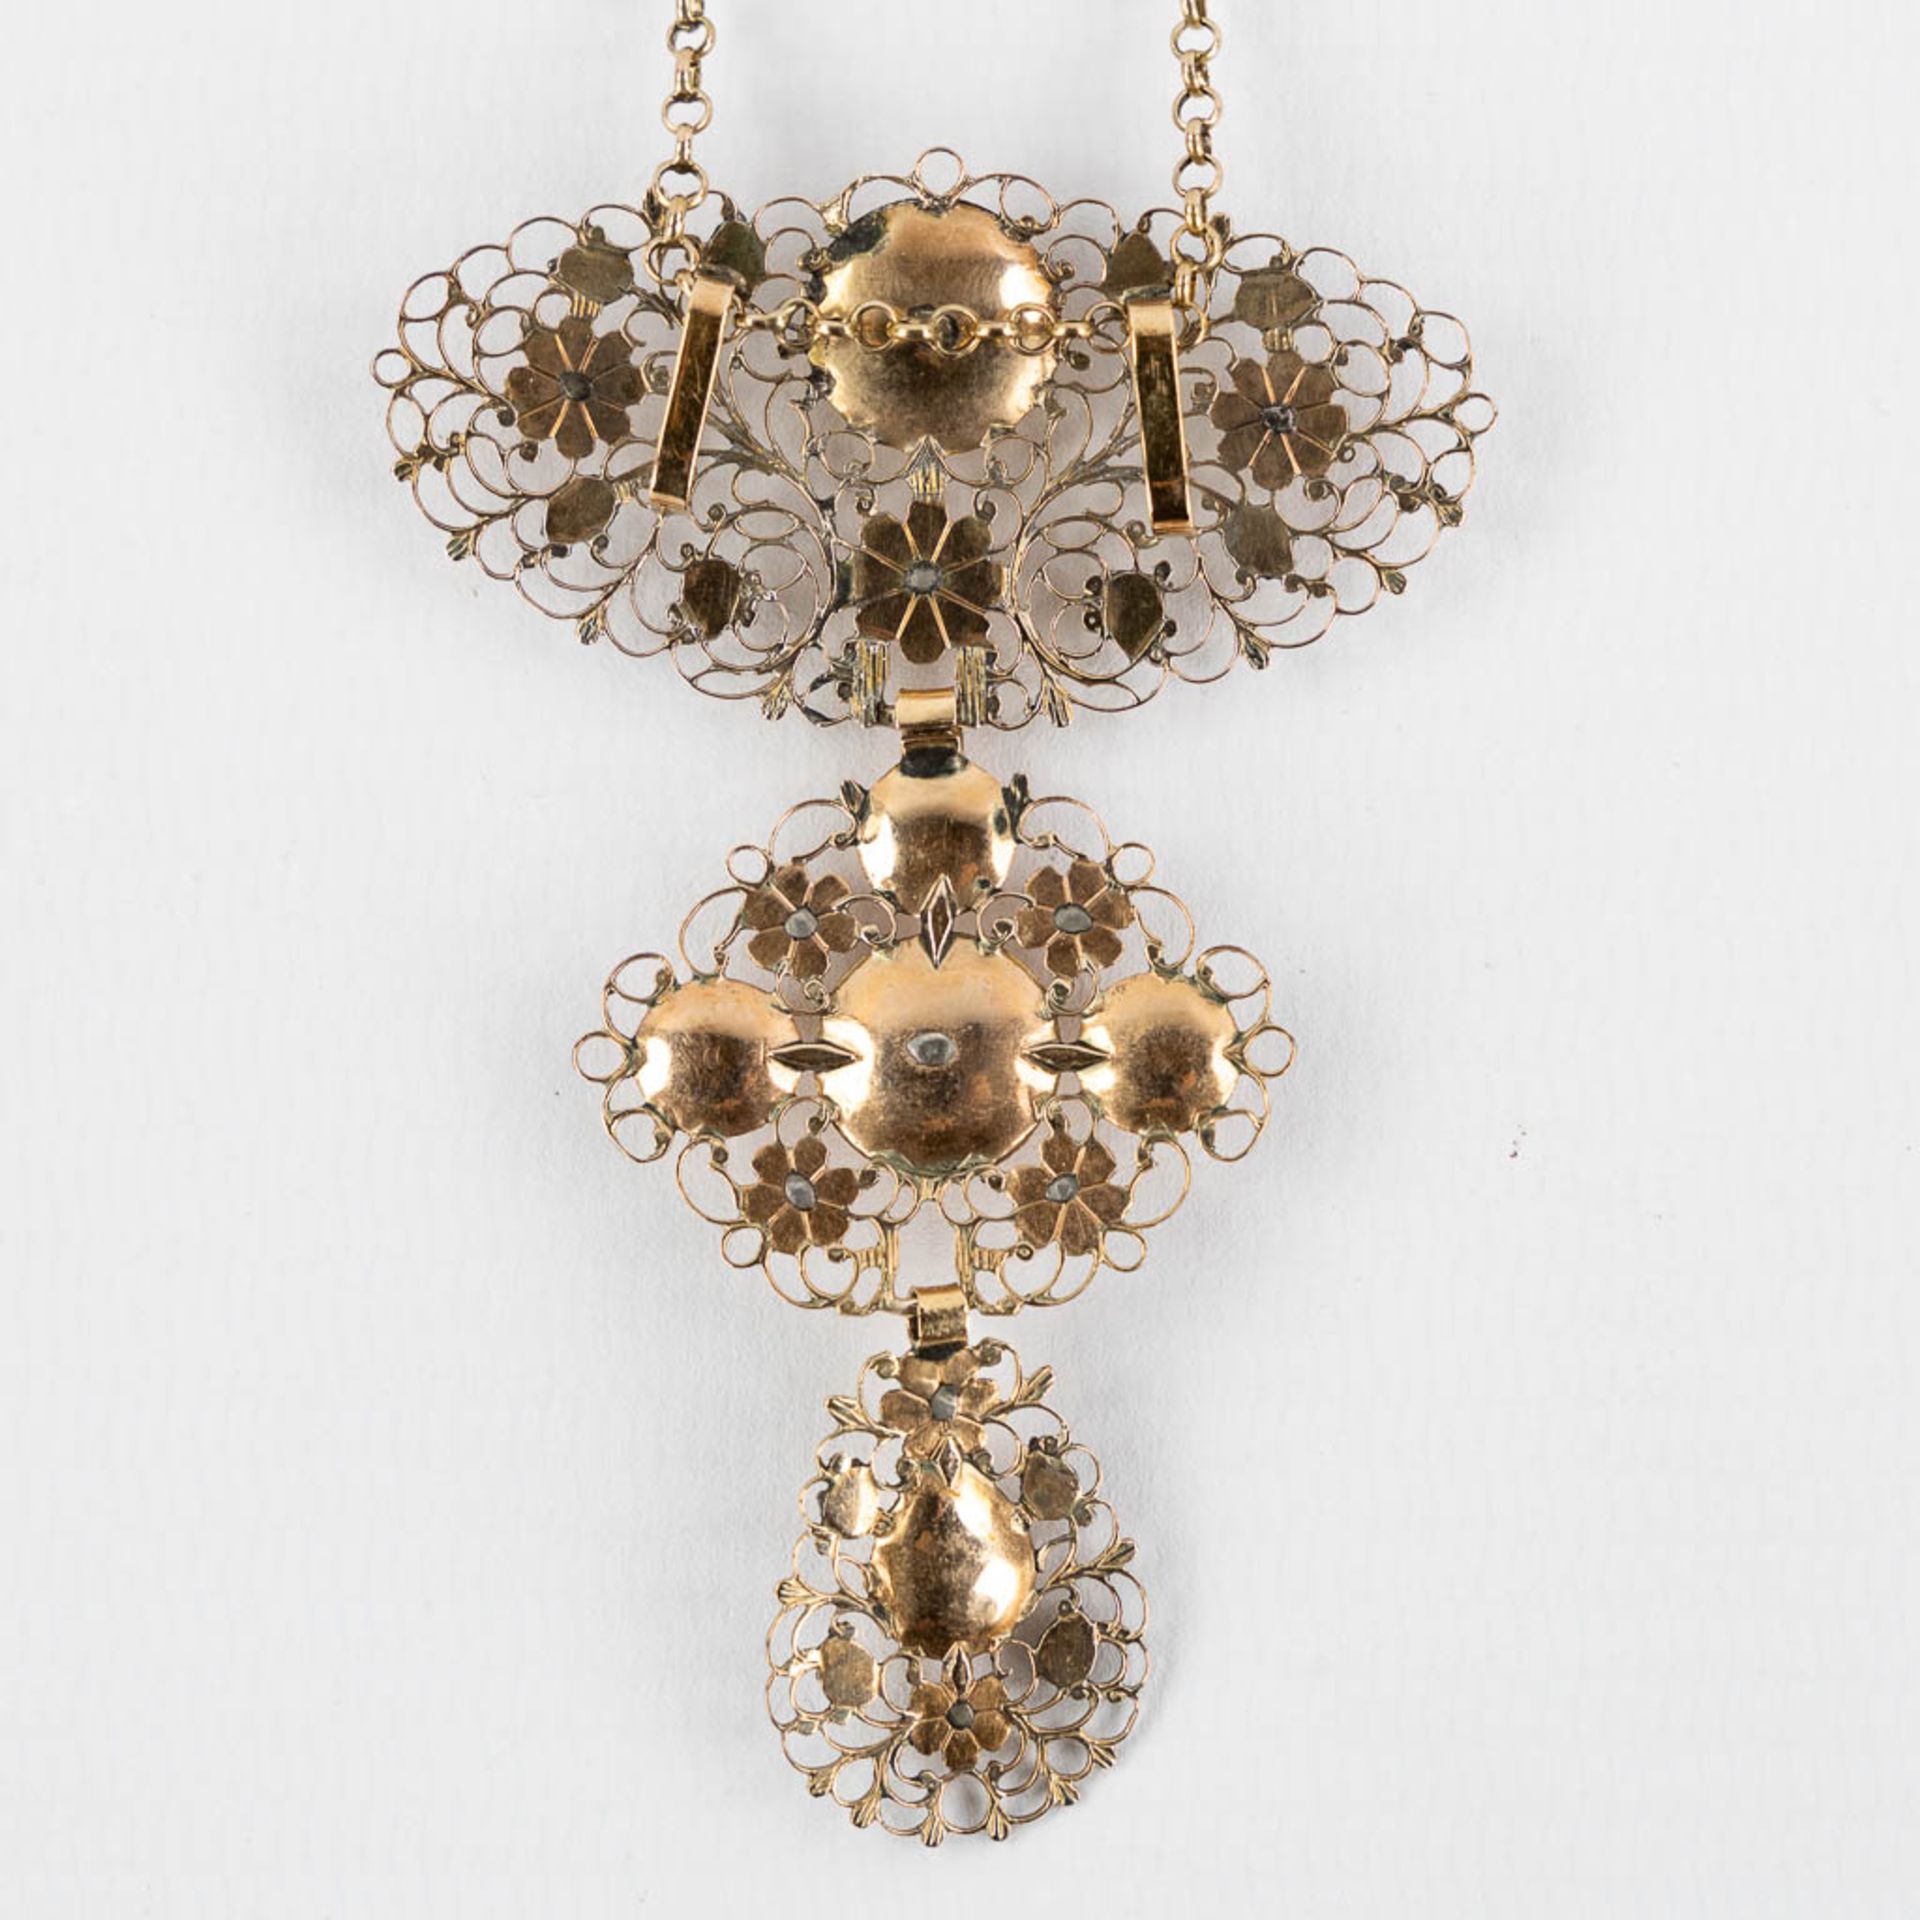 An antique pendant, 18kt yellow gold with old-cut diamonds. 19th C. (H:7,8 cm) - Image 5 of 6